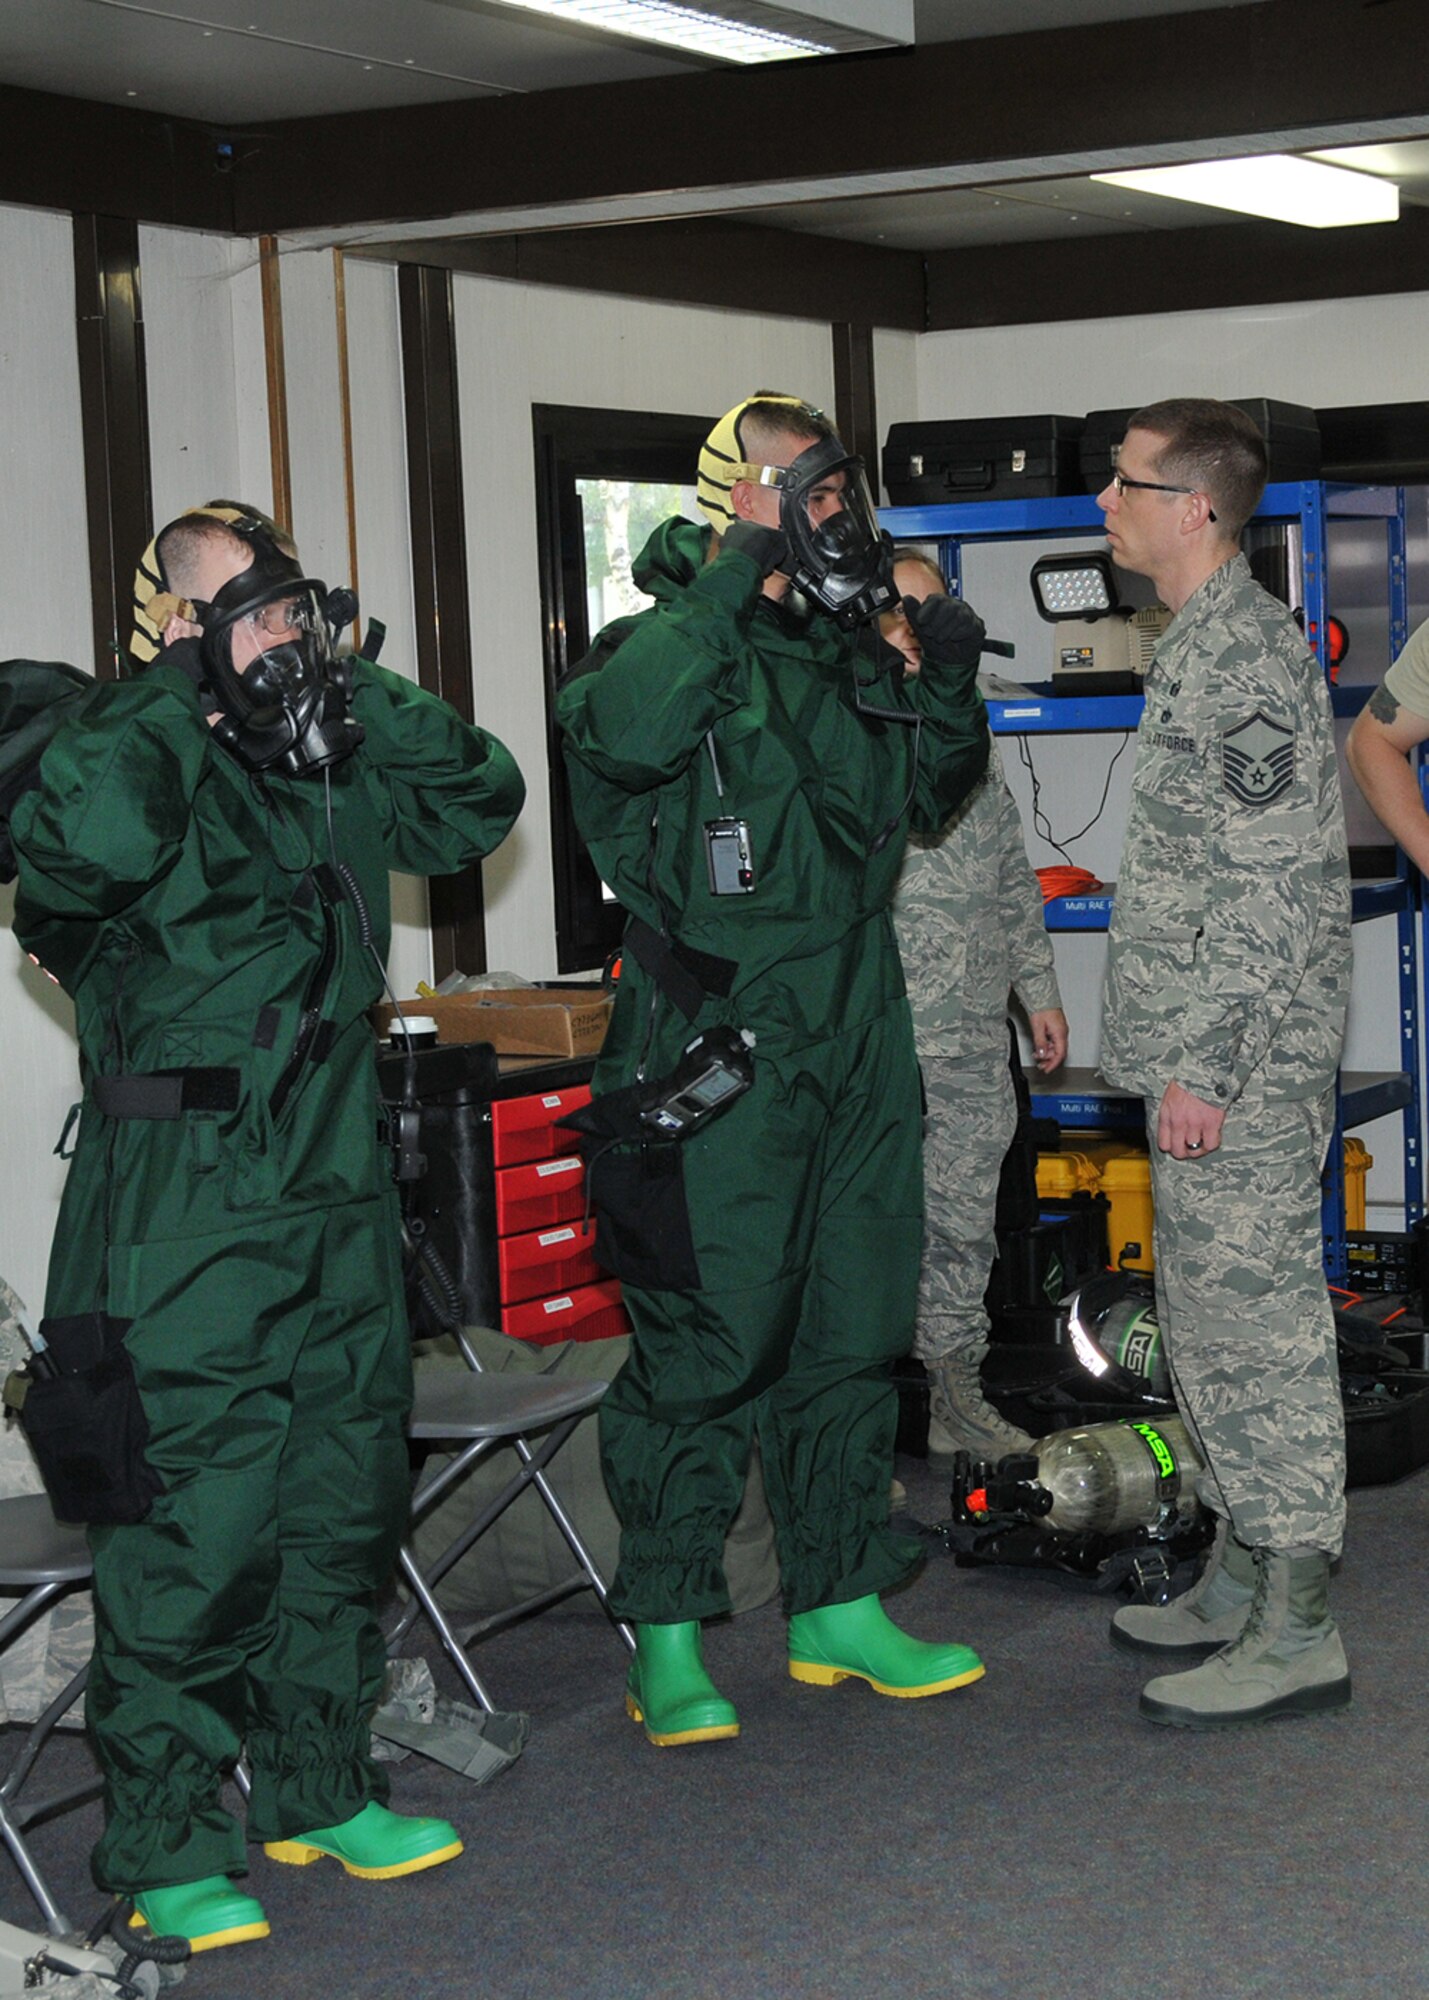 Master Sgt. Christopher McCrary, Emergency Management Flight non-commissioned officer in charge, Barnes Air National Guard Base, Westfield, Mass., inspects Airman 1st Class Neal Colburn and active-duty Staff Sgt. John Gaylord in their Personal Protection Level-B suits during an exercise May 6, 2015, Spangdahlem Air Base, Germany. The Guard and active-duty Airmen are training together on Active CBRNE (Chemical Biological Radiological Nuclear and High- Yield Explosives) Response to enhance their Hazmat Technician Certification. This is a required training that needs to be done by the guard and the active duty. Doing the training together allows them to increase their knowledge by sharing their experiences and use different types of equipment. (U.S. Air National Guard photo by Tech. Sgt. Melanie J. Casineau/Released)